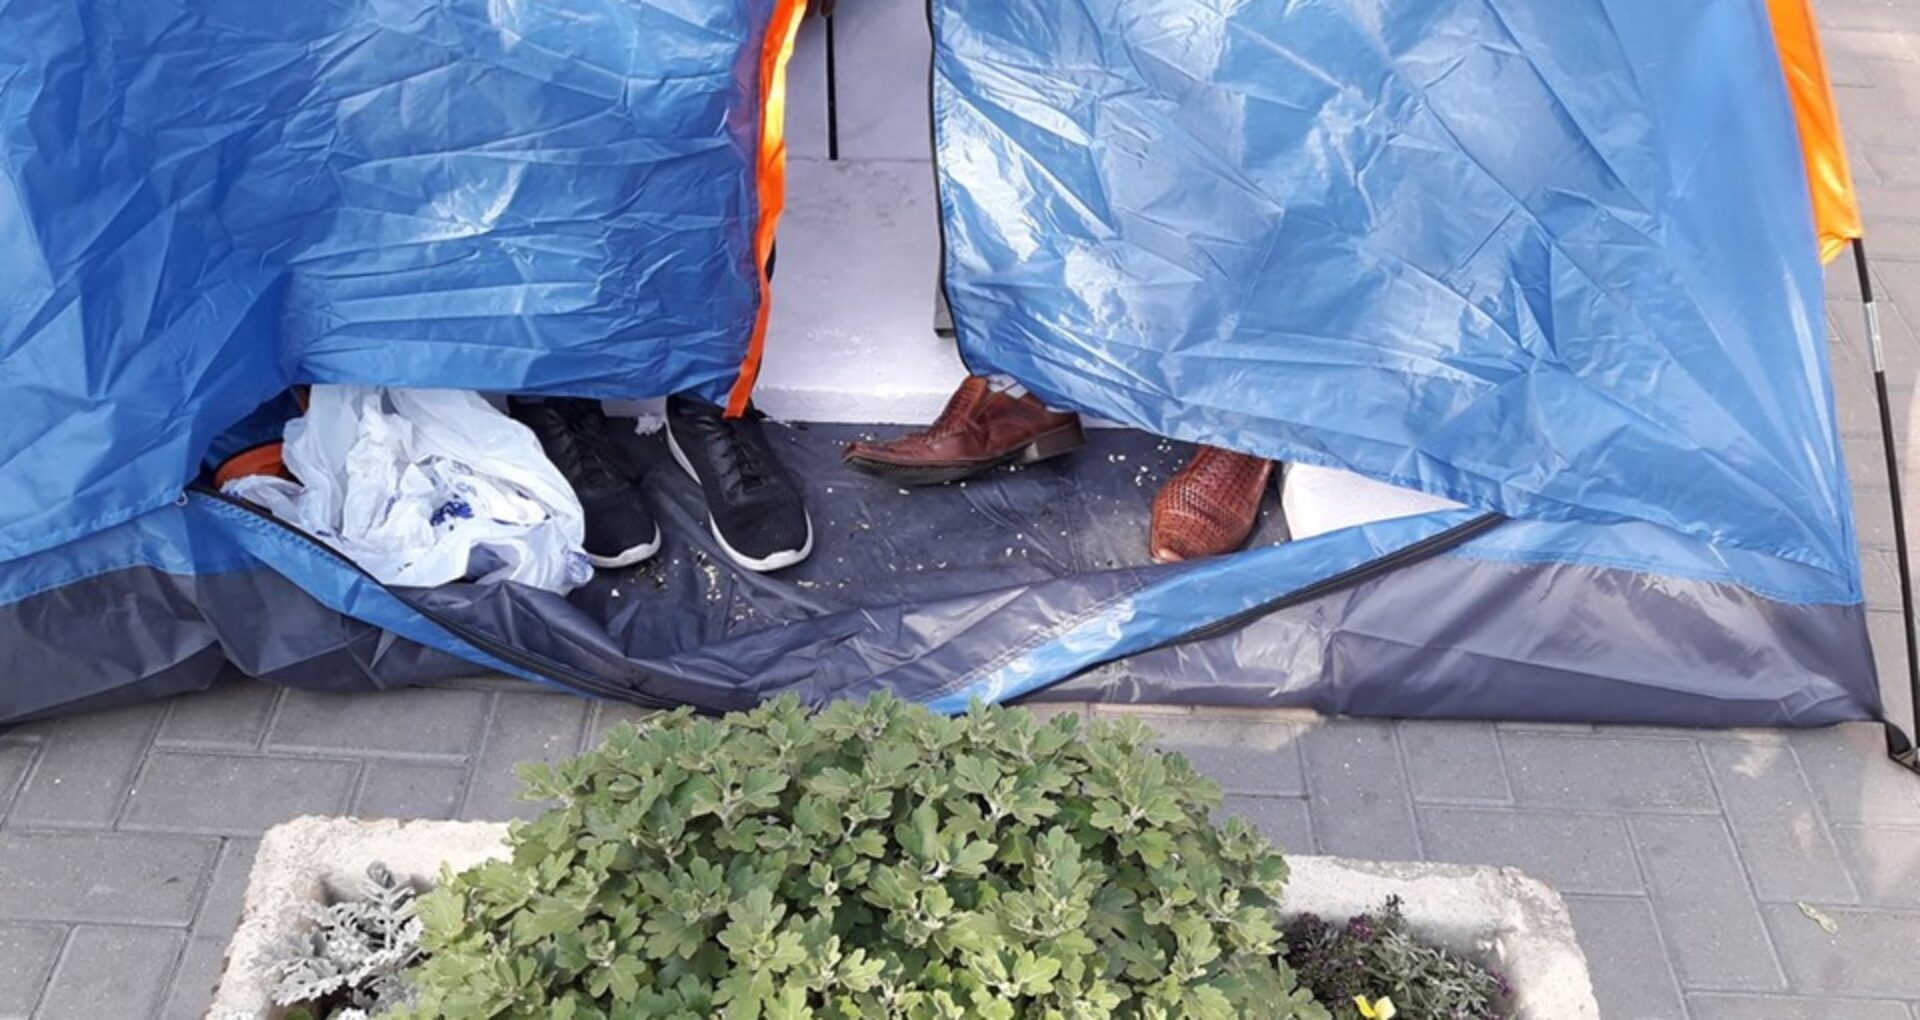 VIDEO / Under cover: “Food, and roubles, and ice cream, and pool.” How much does a day of sitting in tents in front of state institutions cost